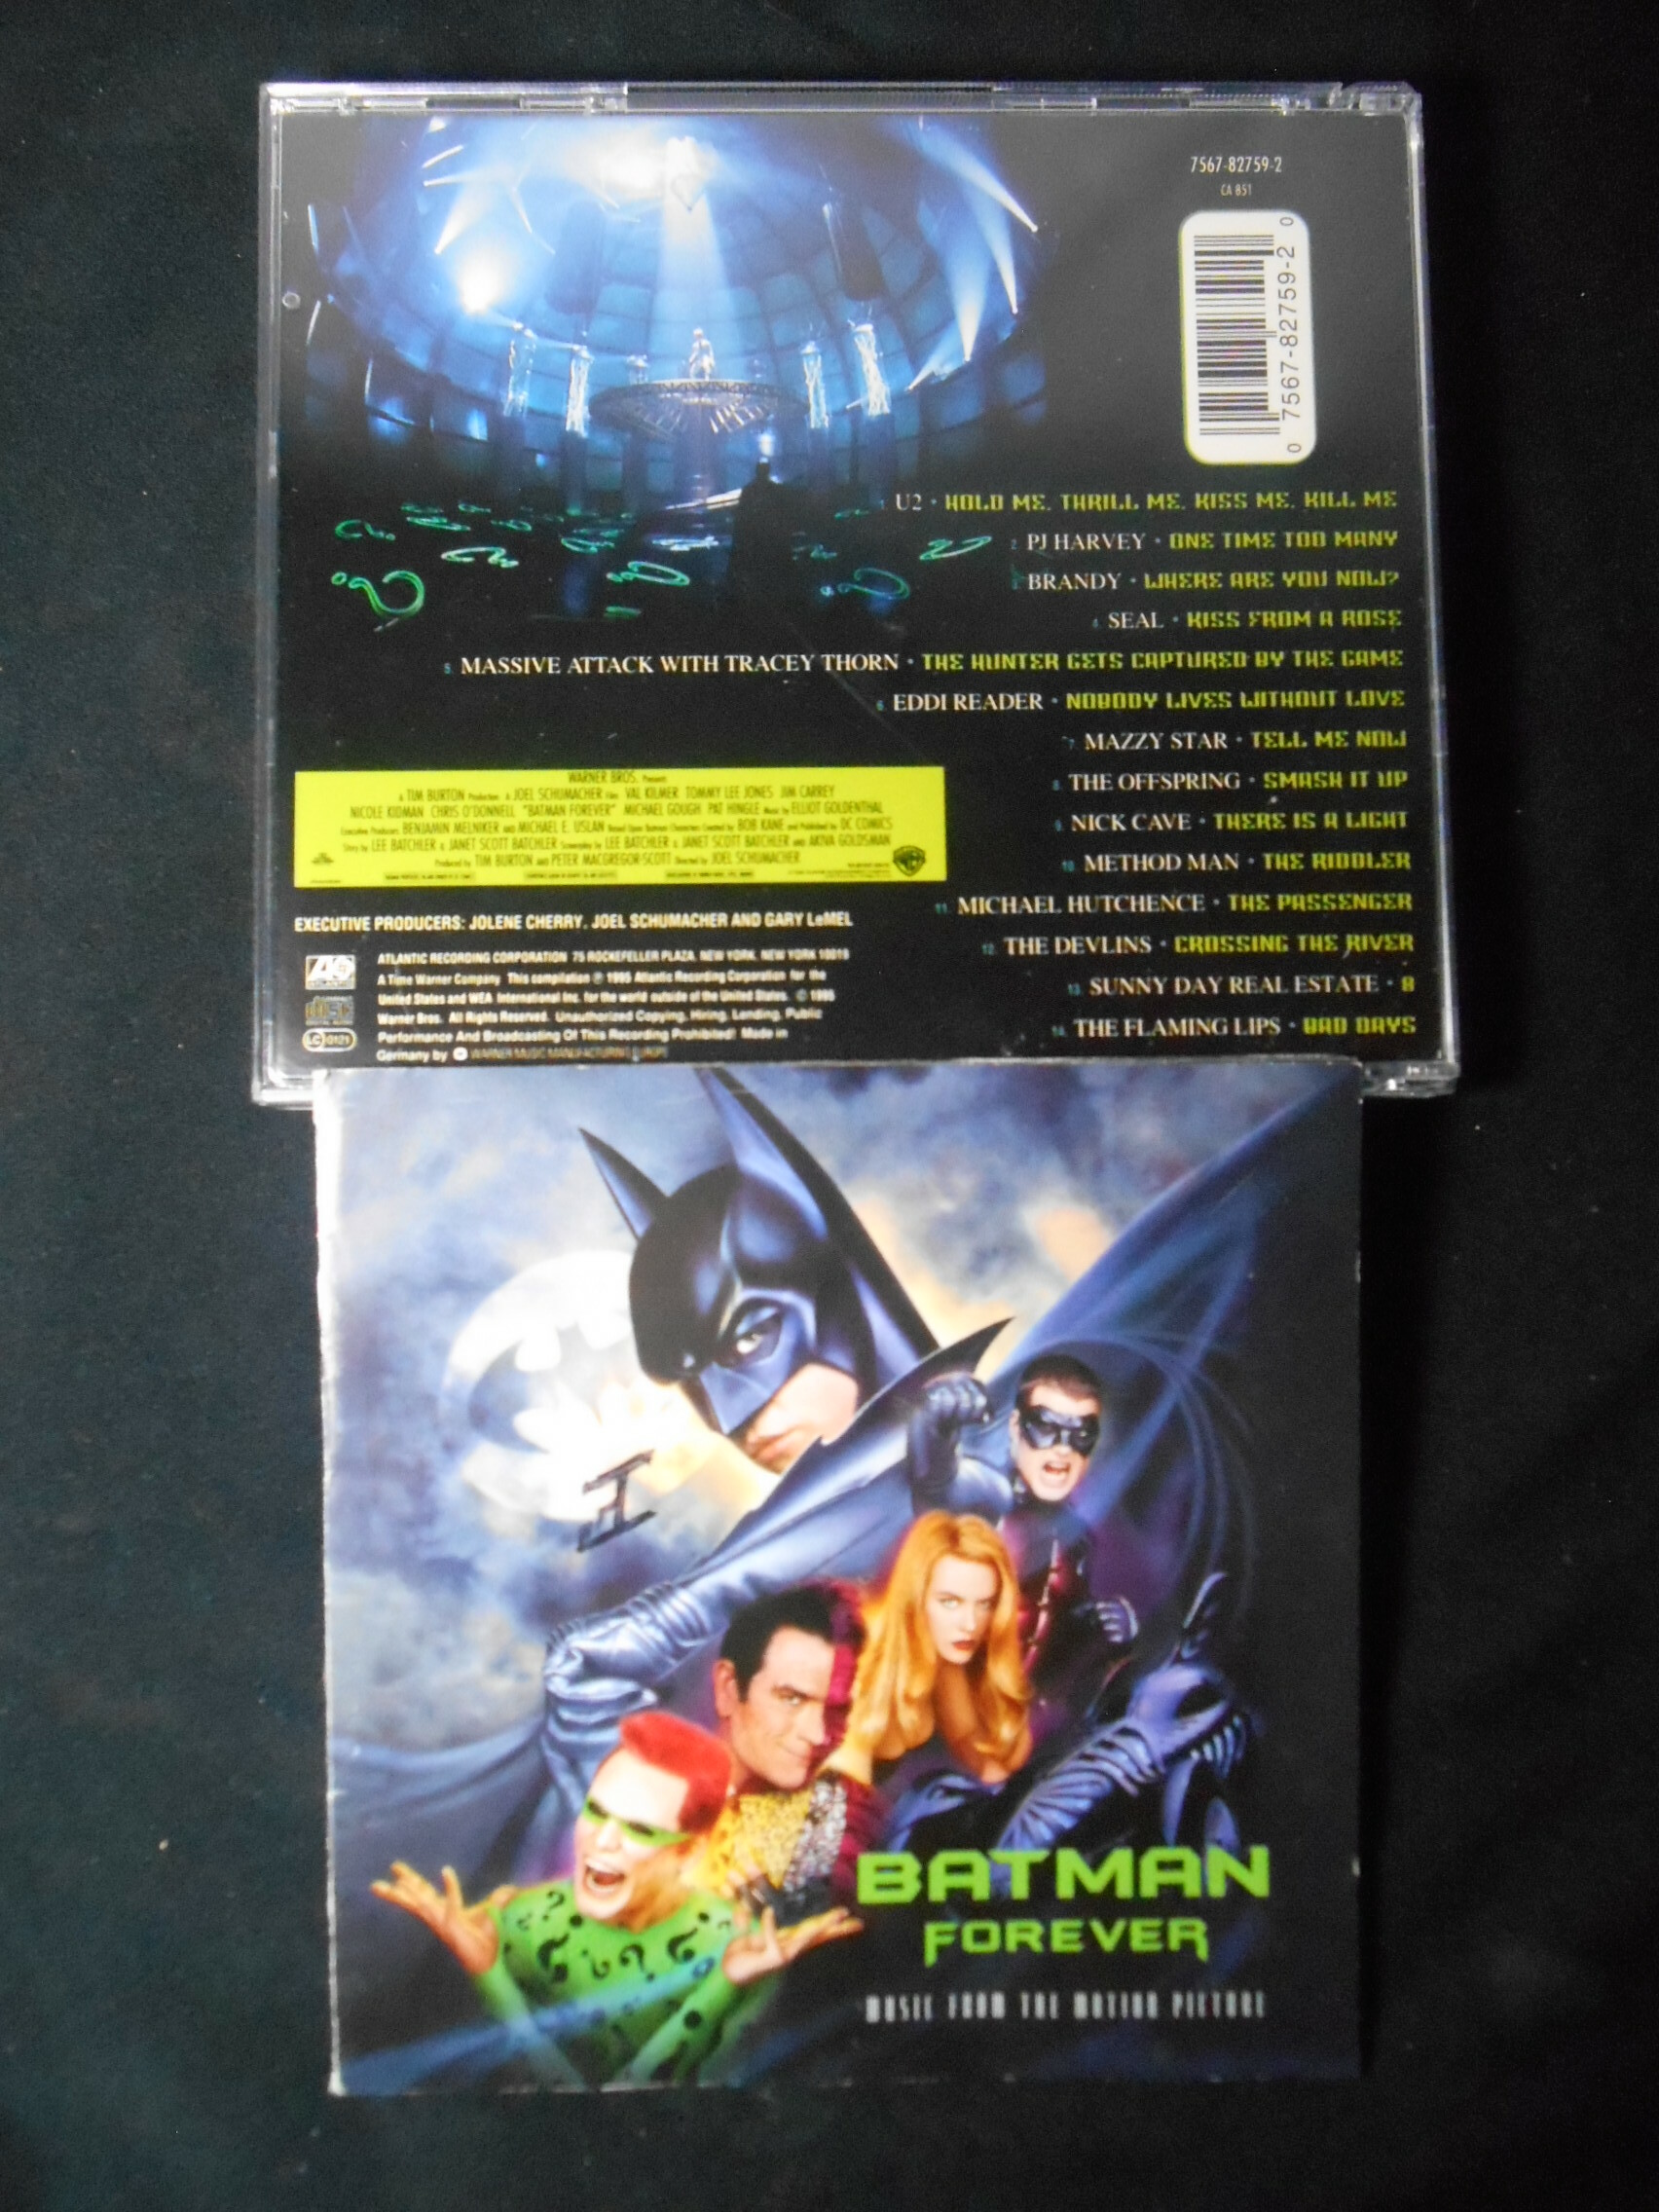 CD - Batman Forever - Original Music From The Motion Picture (germany)